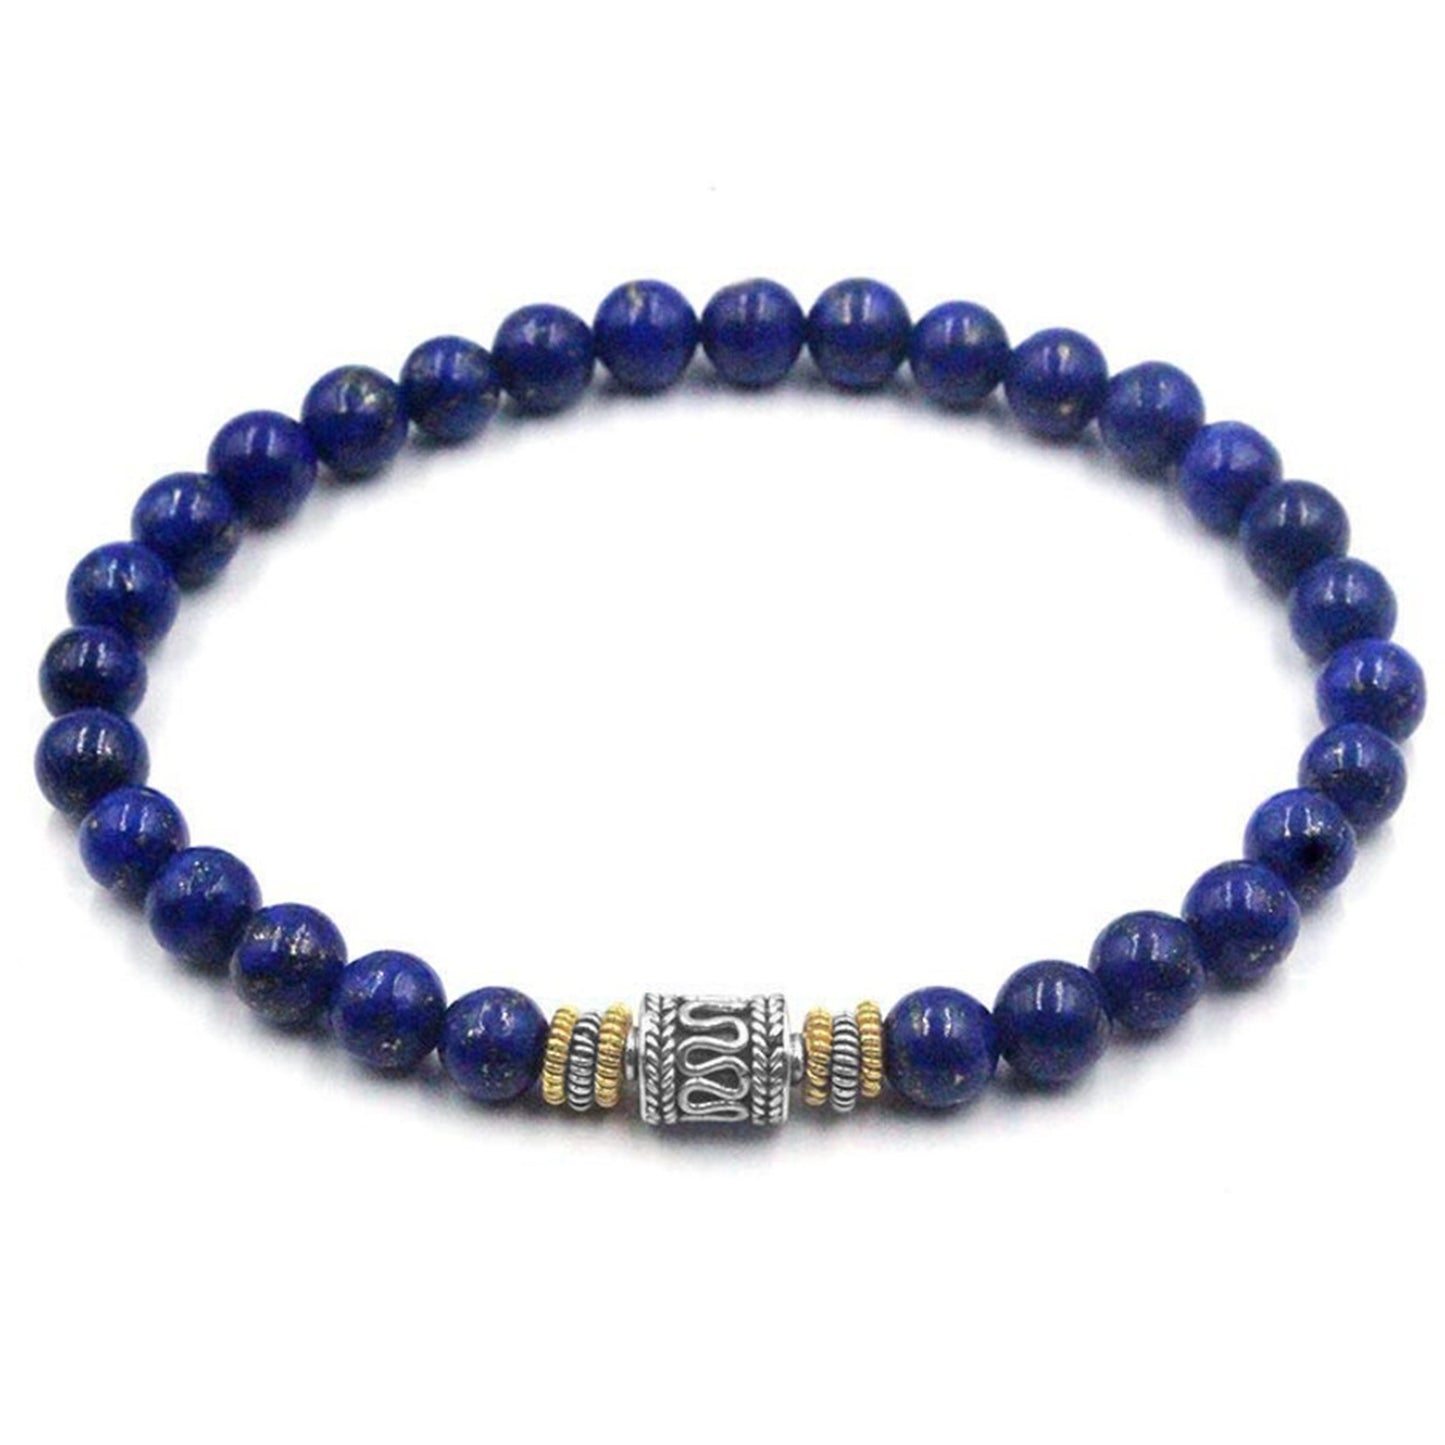 Lapis Lazuli and Sterling Silver/Gold